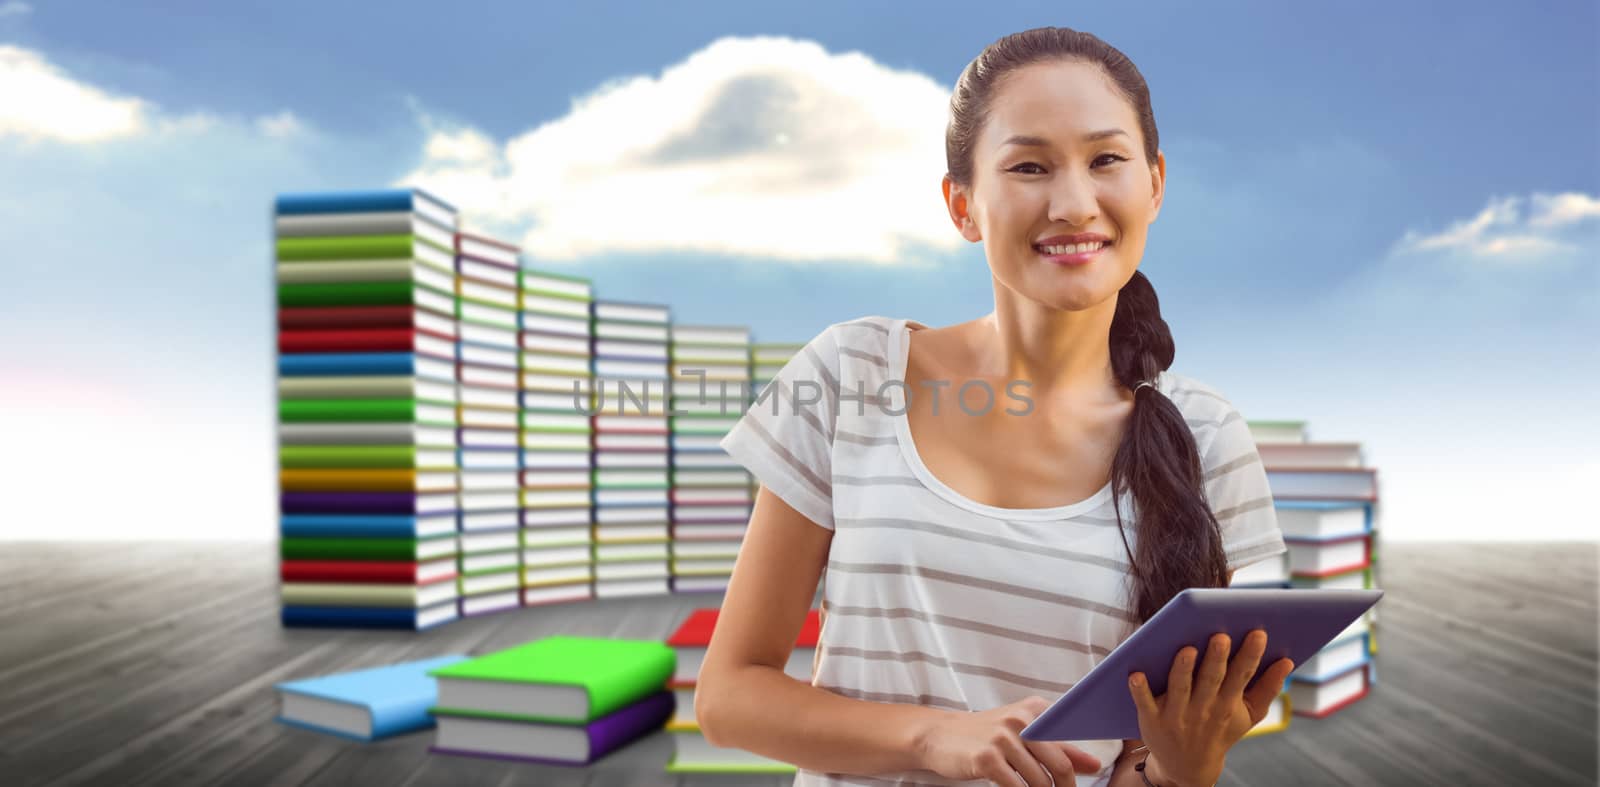 Businesswoman using tablet in the office against steps made of books against sky